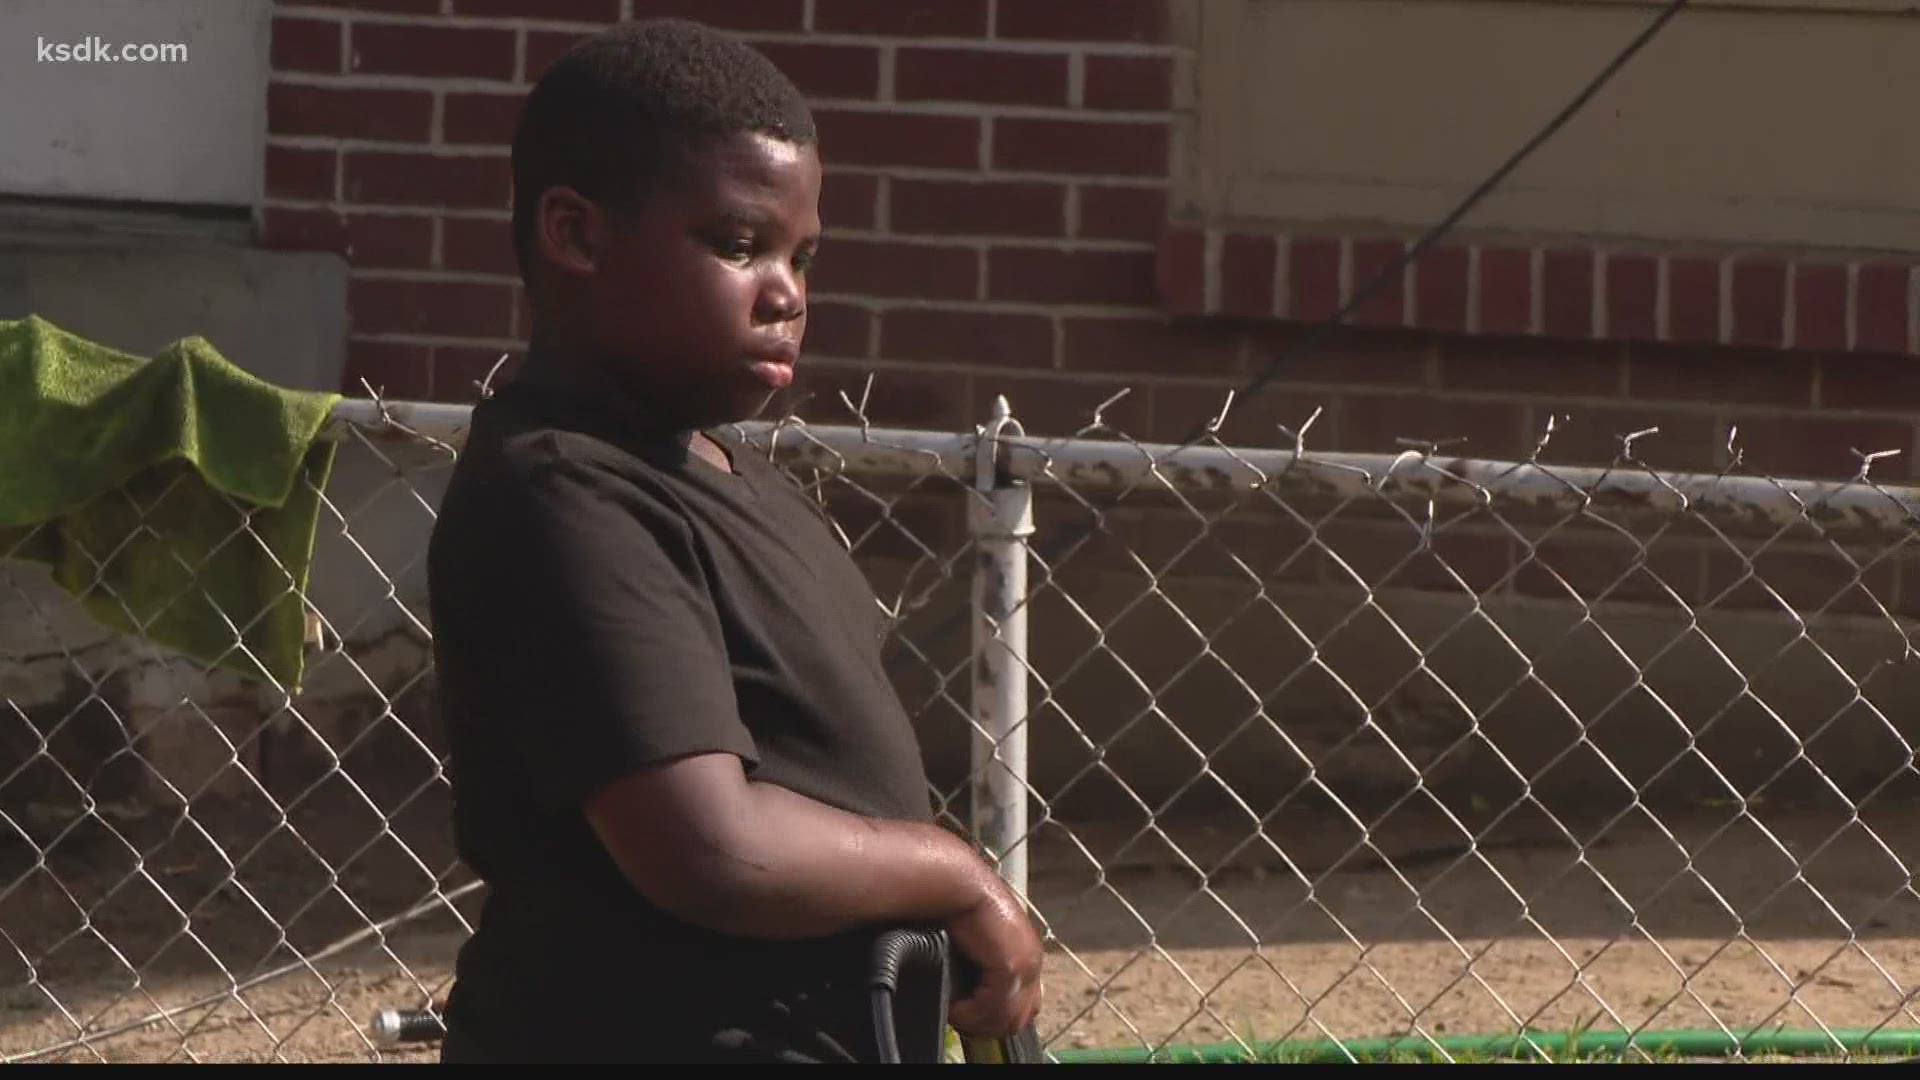 "We should stop messing up our own neighborhoods. I don't like it. It's just unnecessary," said 11-year-old Deion Moore